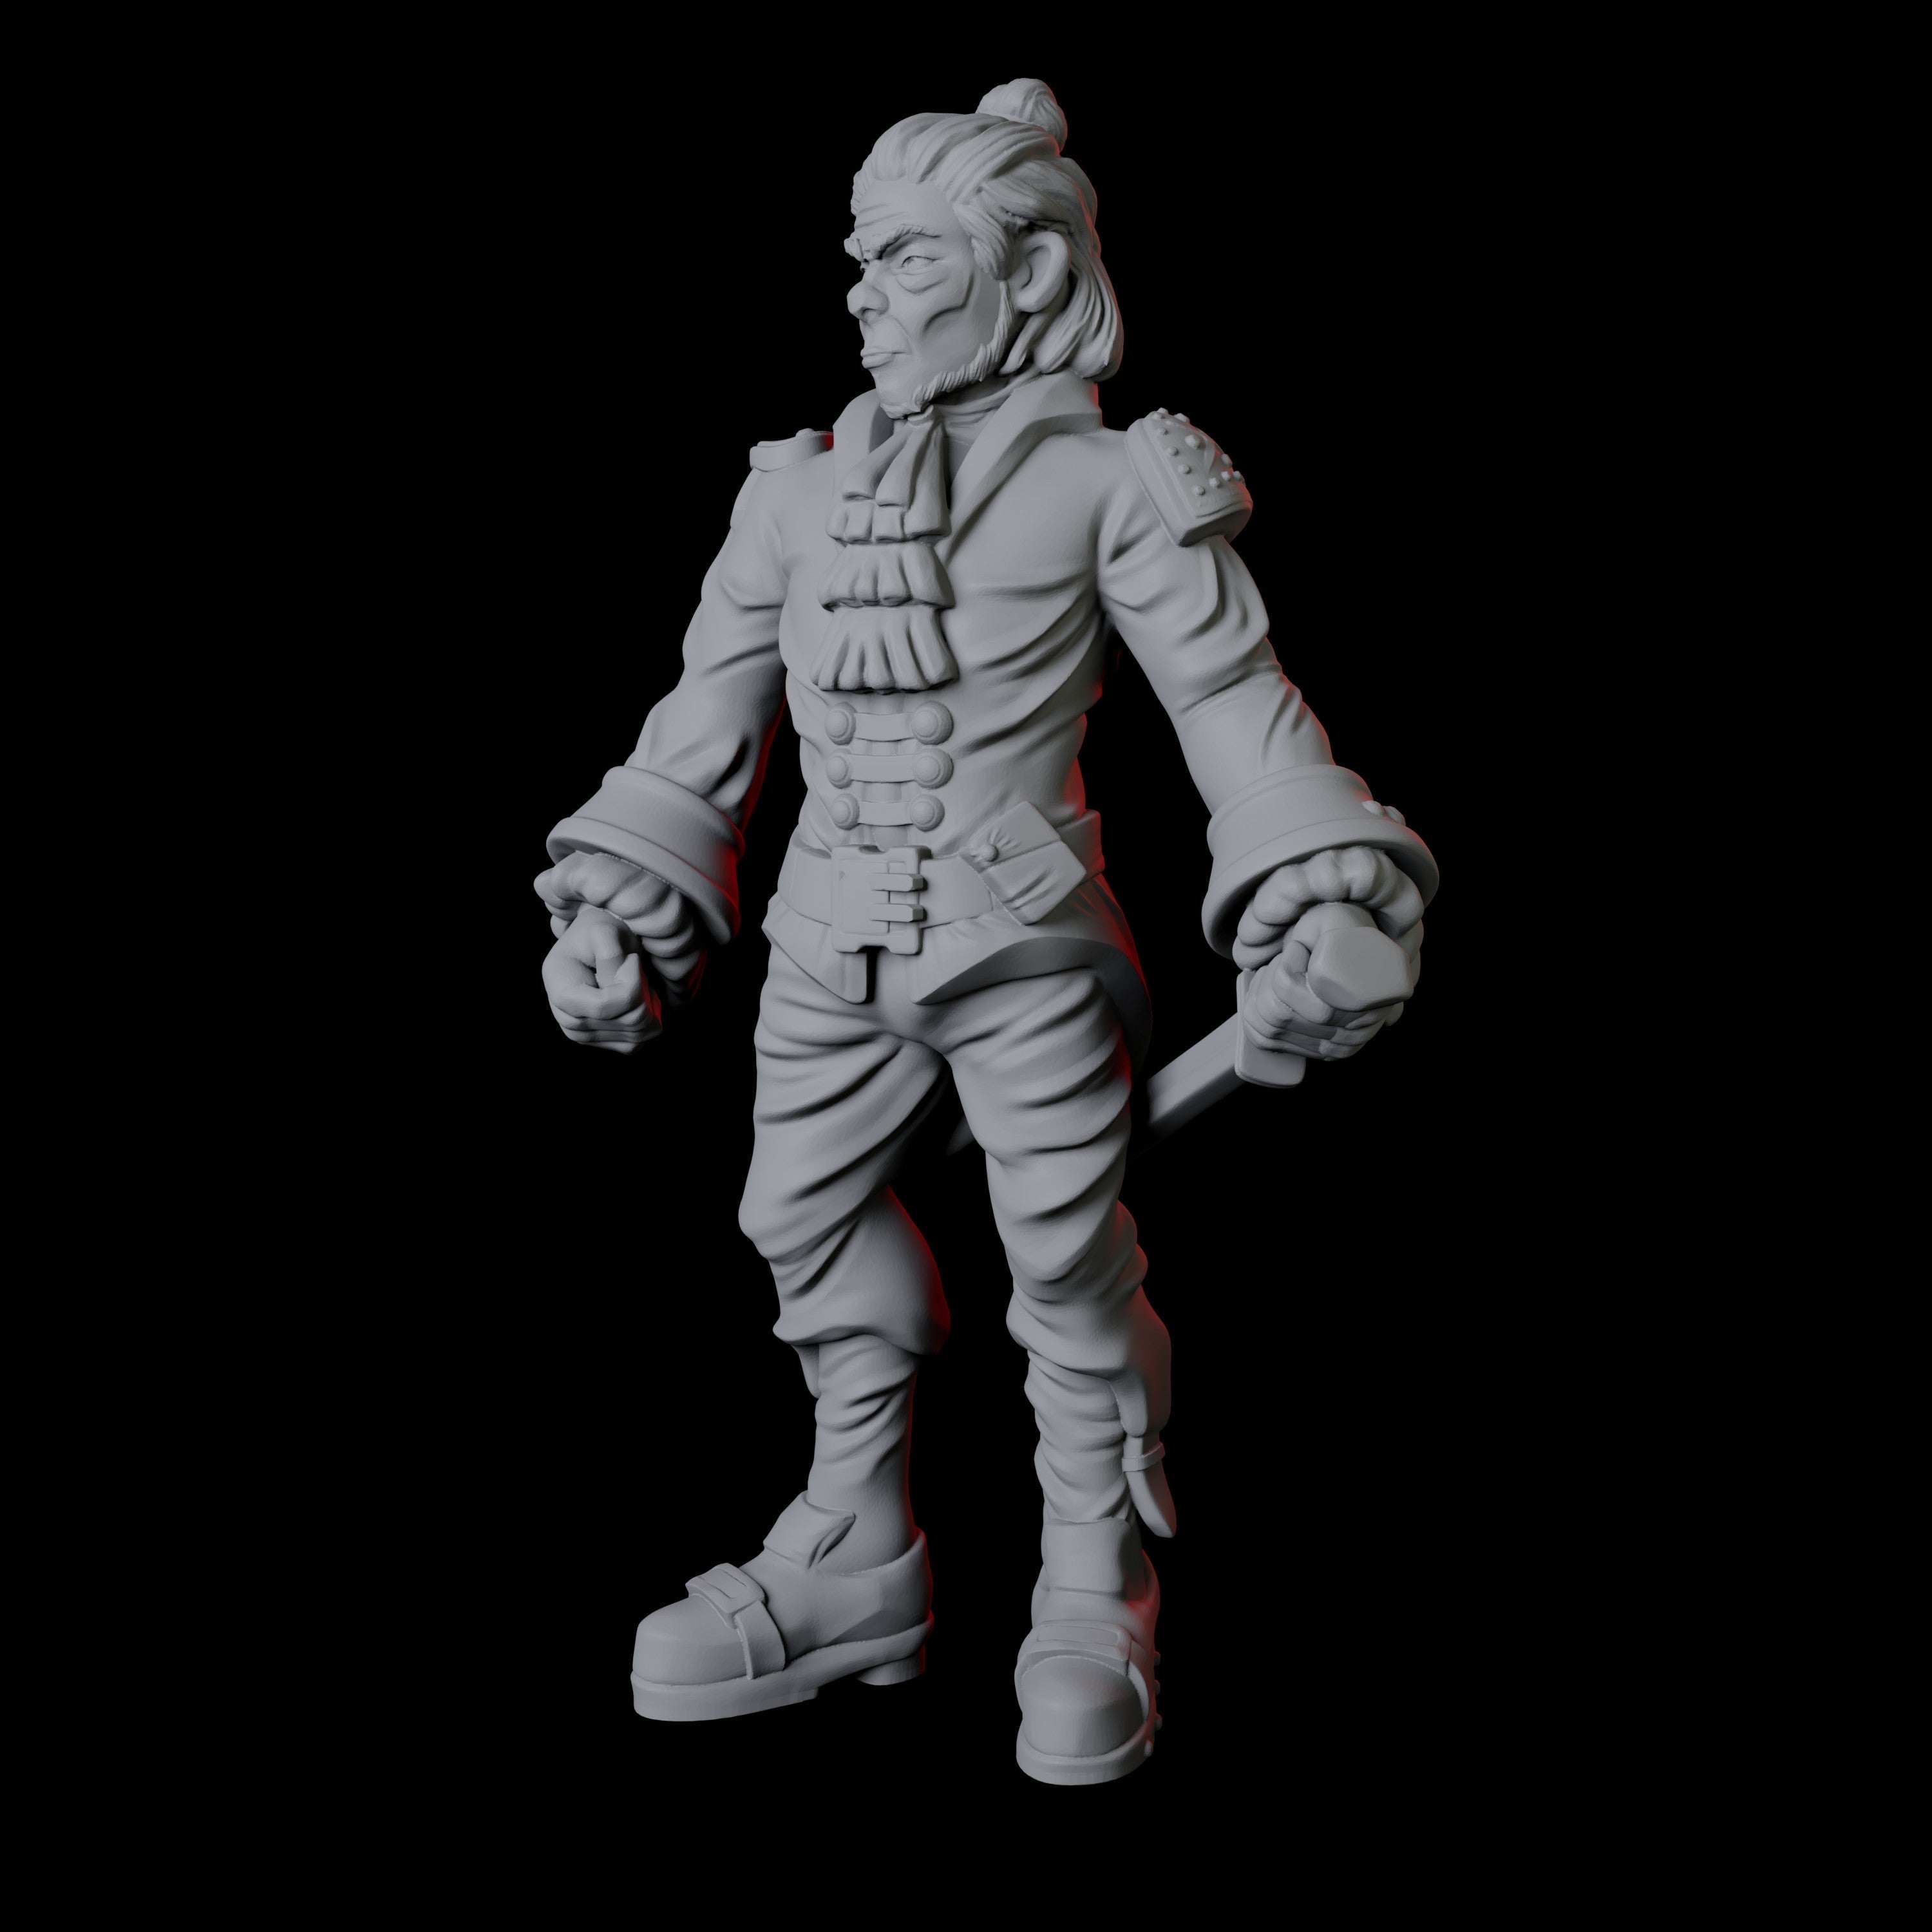 Masquerade Lord B Miniature for Dungeons and Dragons